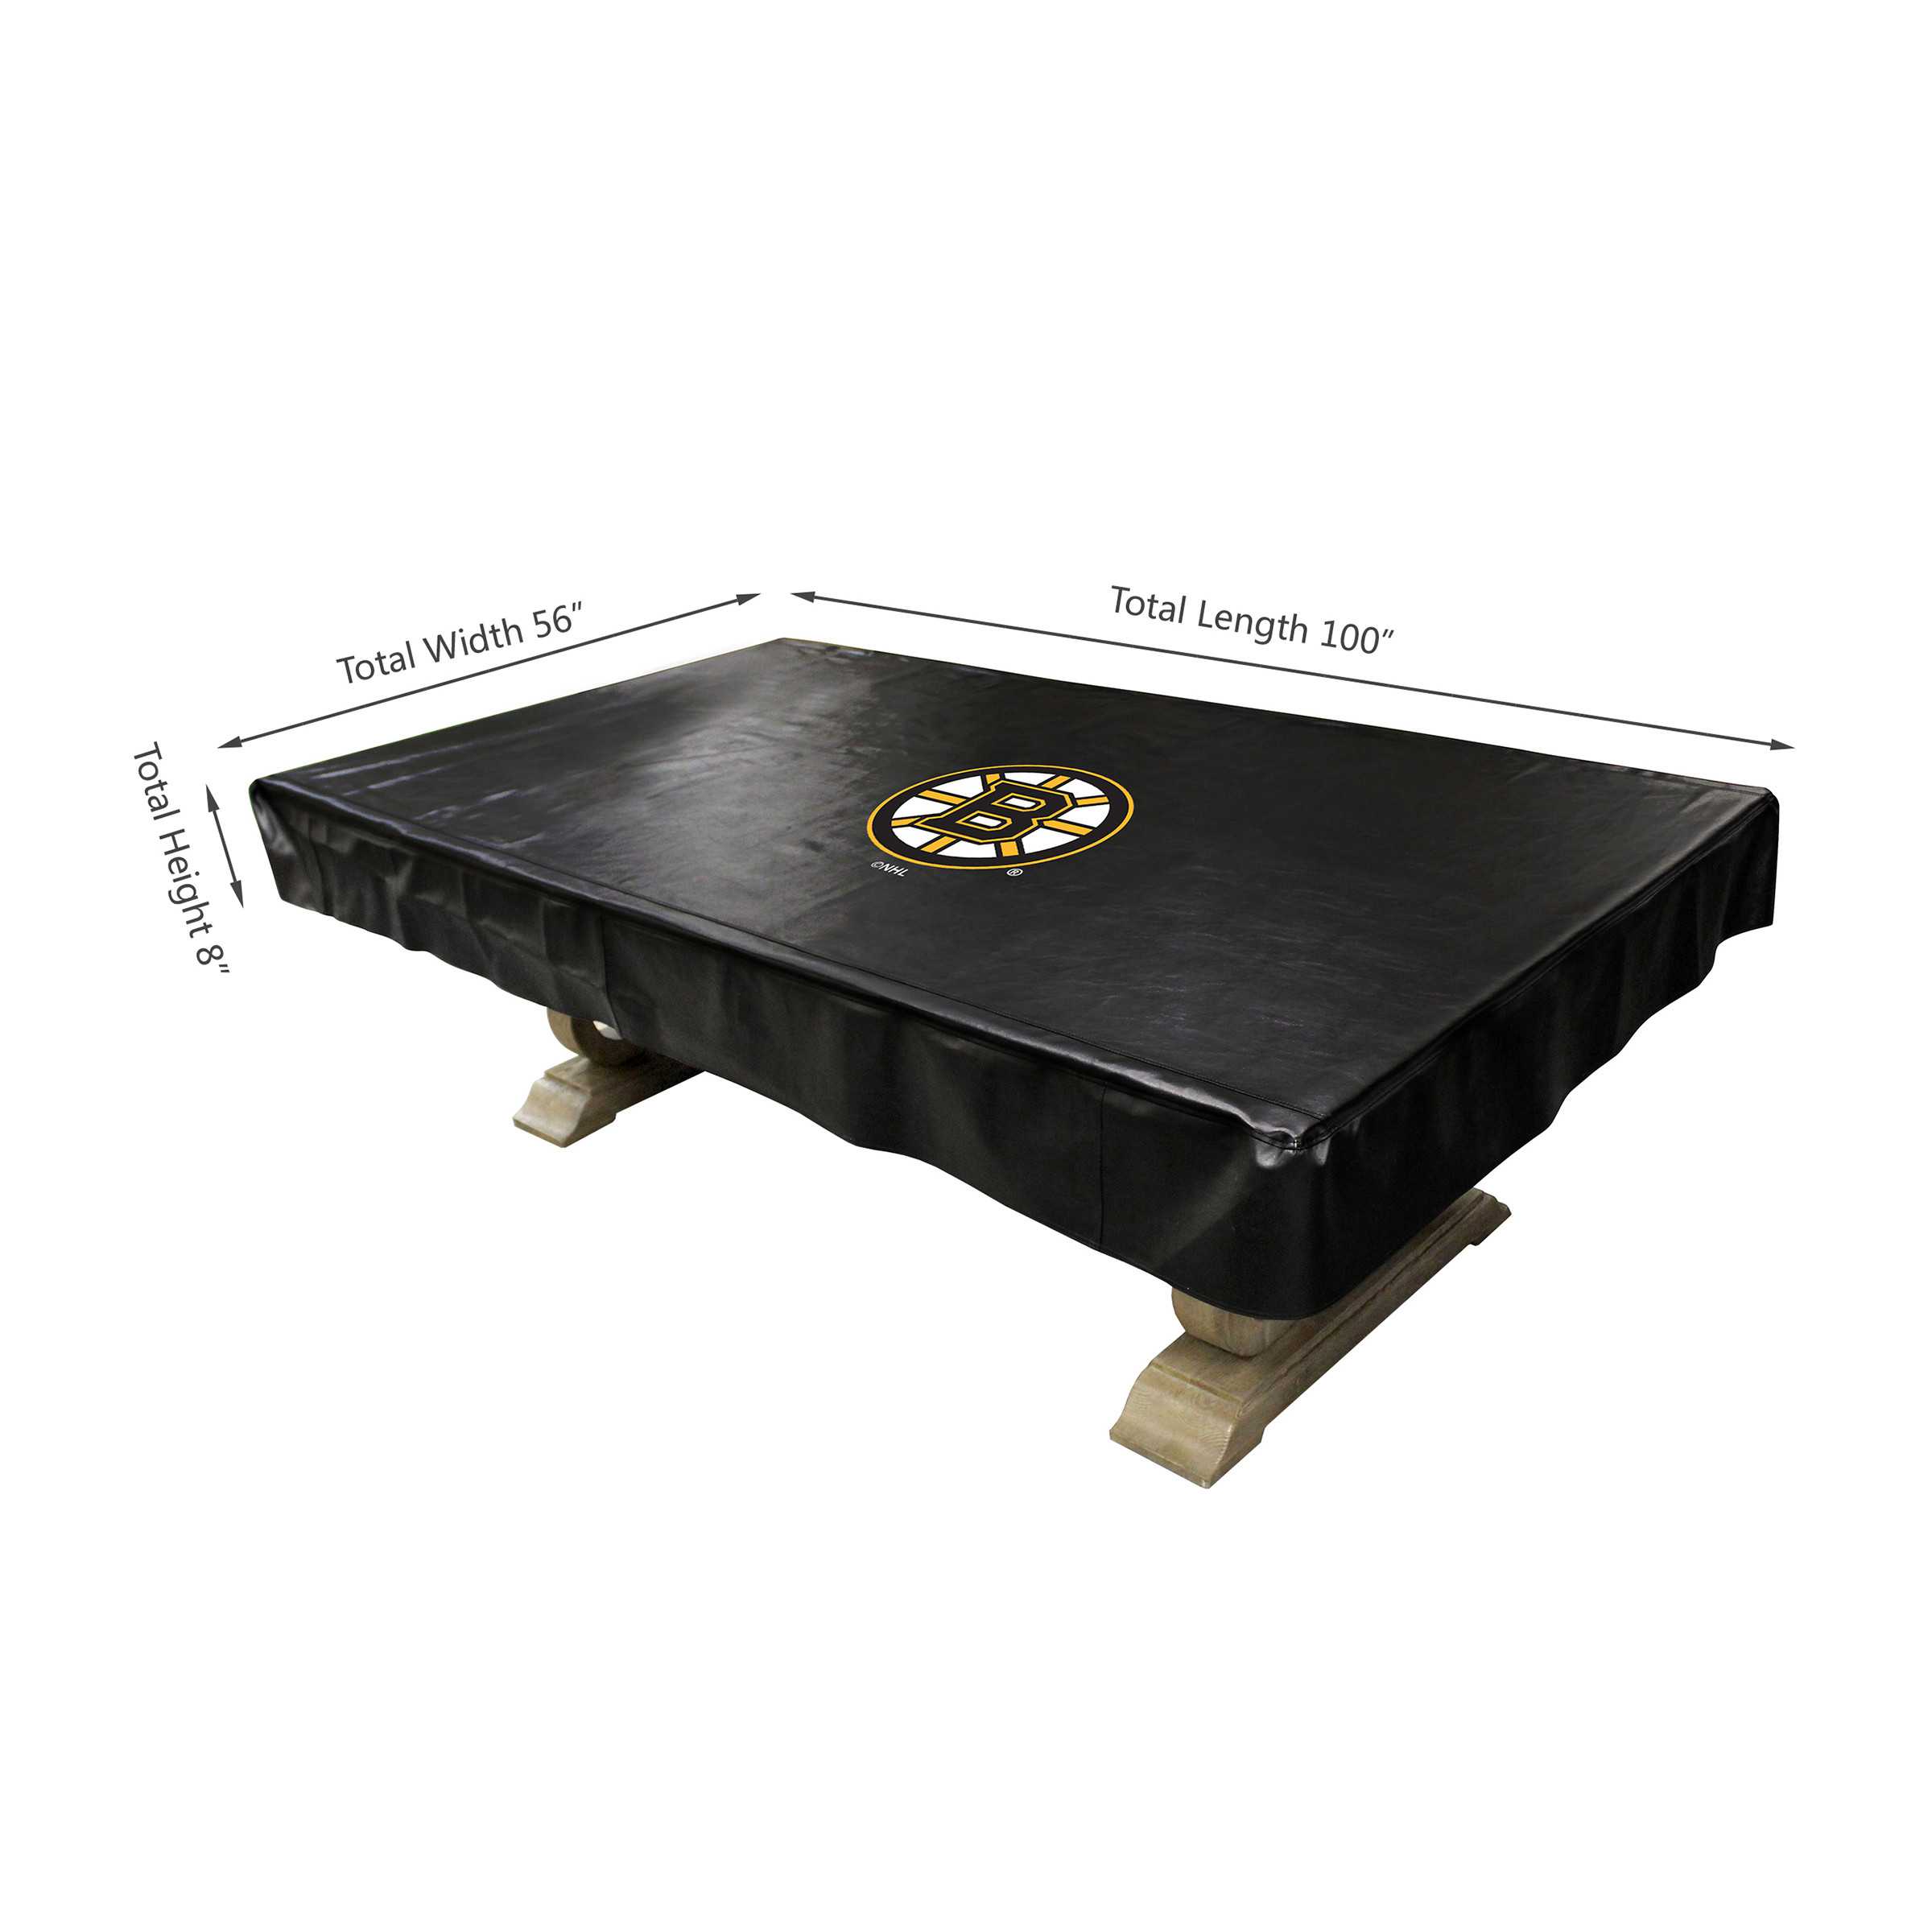 BOSTON BRUINS8' DELUXE POOL TABLE COVER